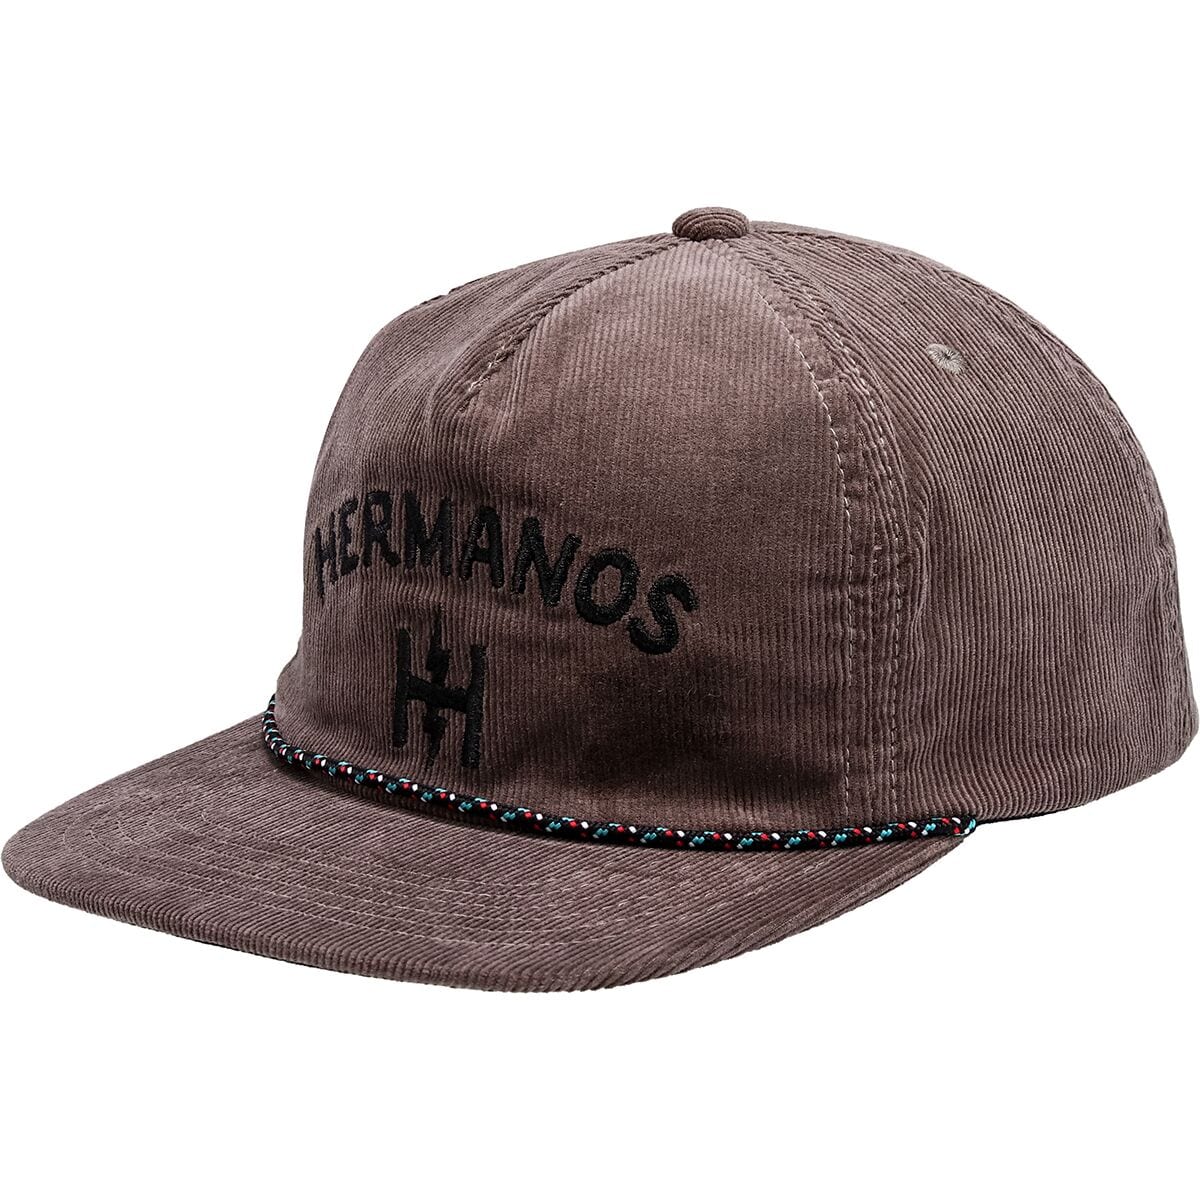 Howler Brothers Hermanos Unstructured Snapback Hat